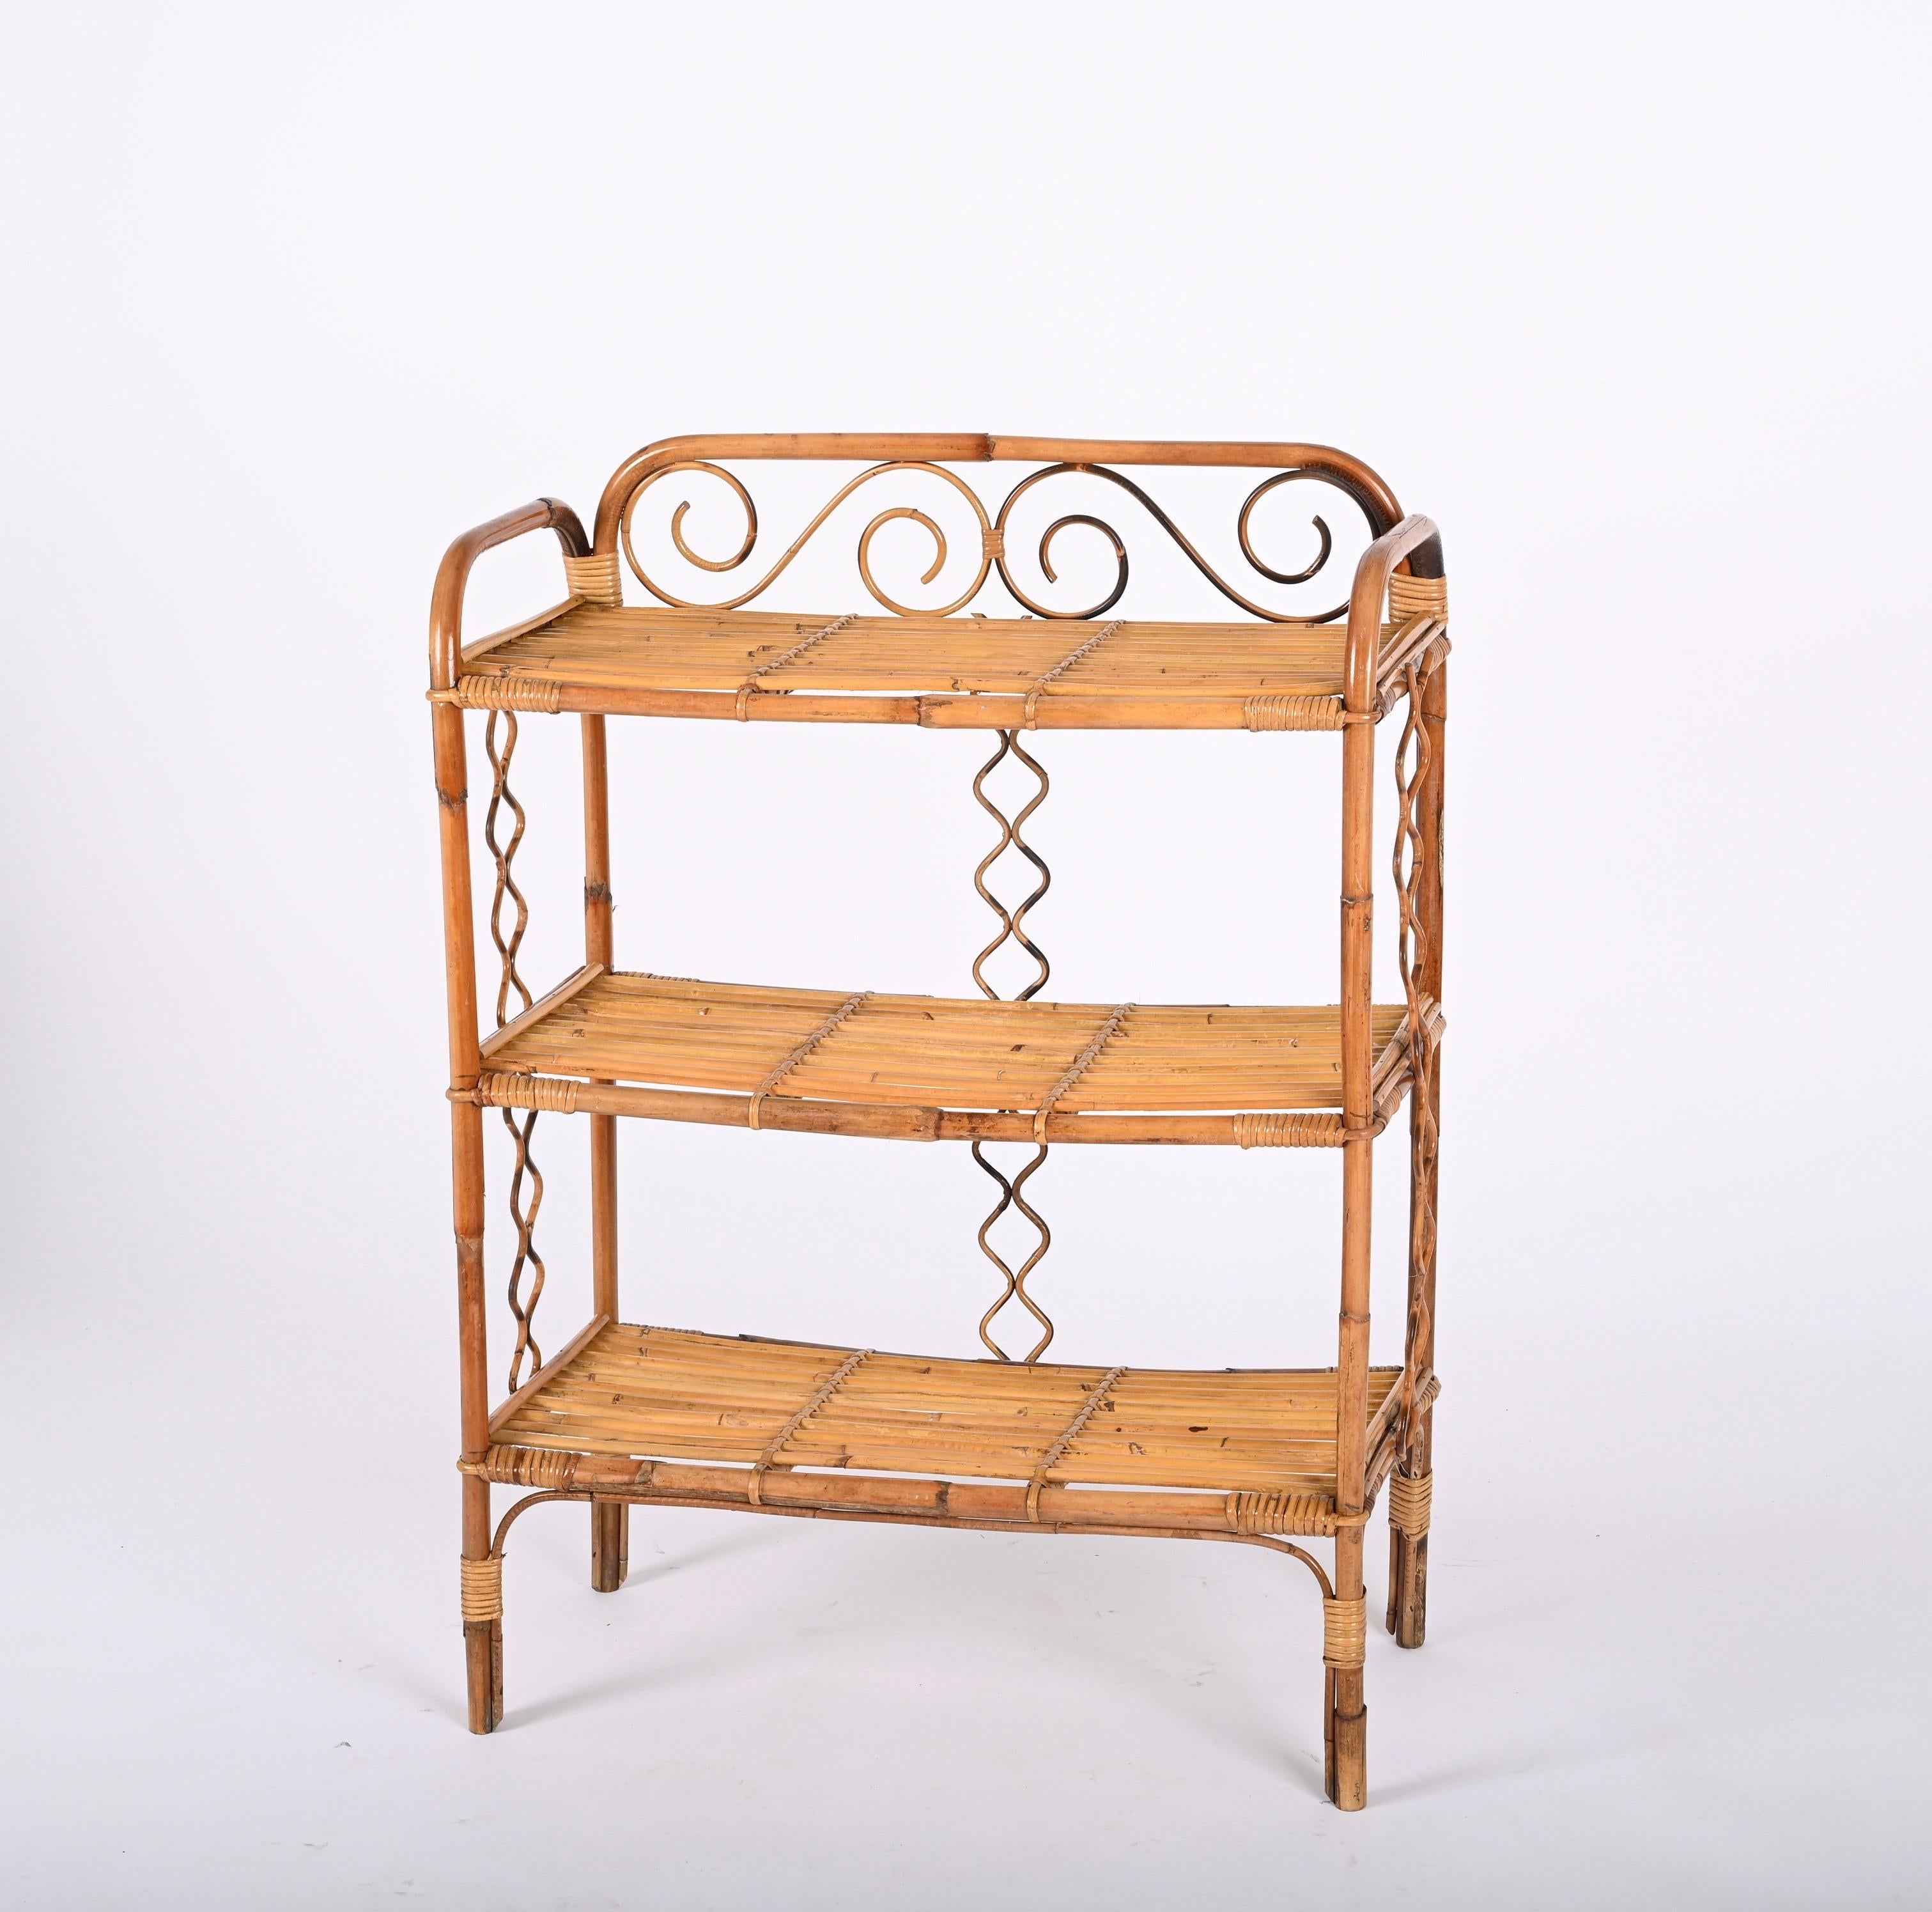 Midcentury Étagère Bamboo and Rattan, Italian Bookcase with Three Shelves, 1970s For Sale 4